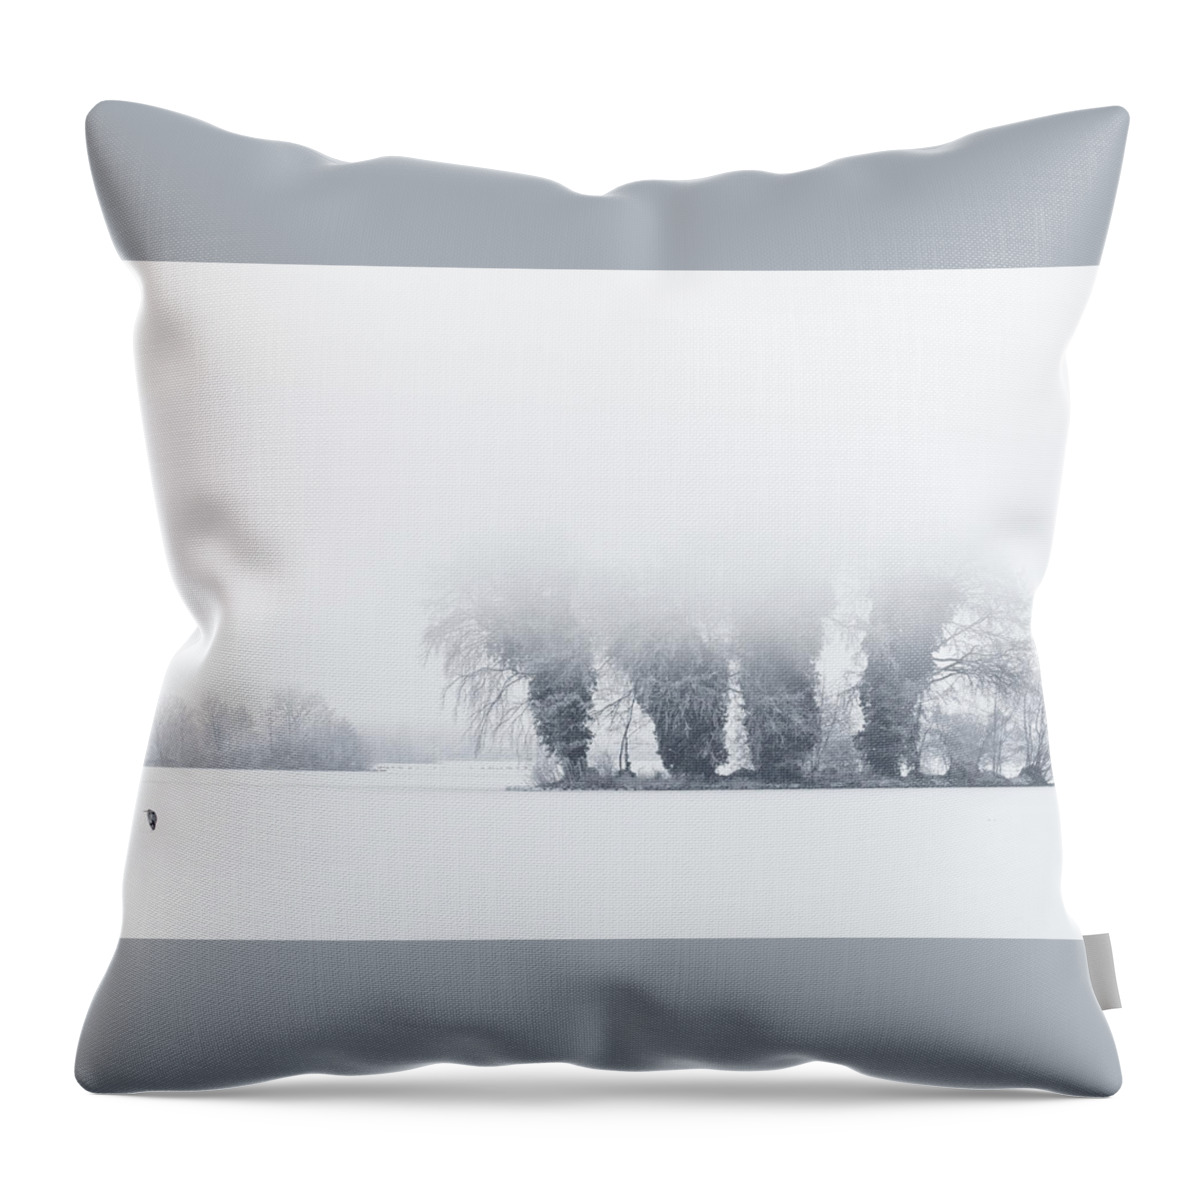 Snow Throw Pillow featuring the photograph The Lonely Heron by Roeselien Raimond